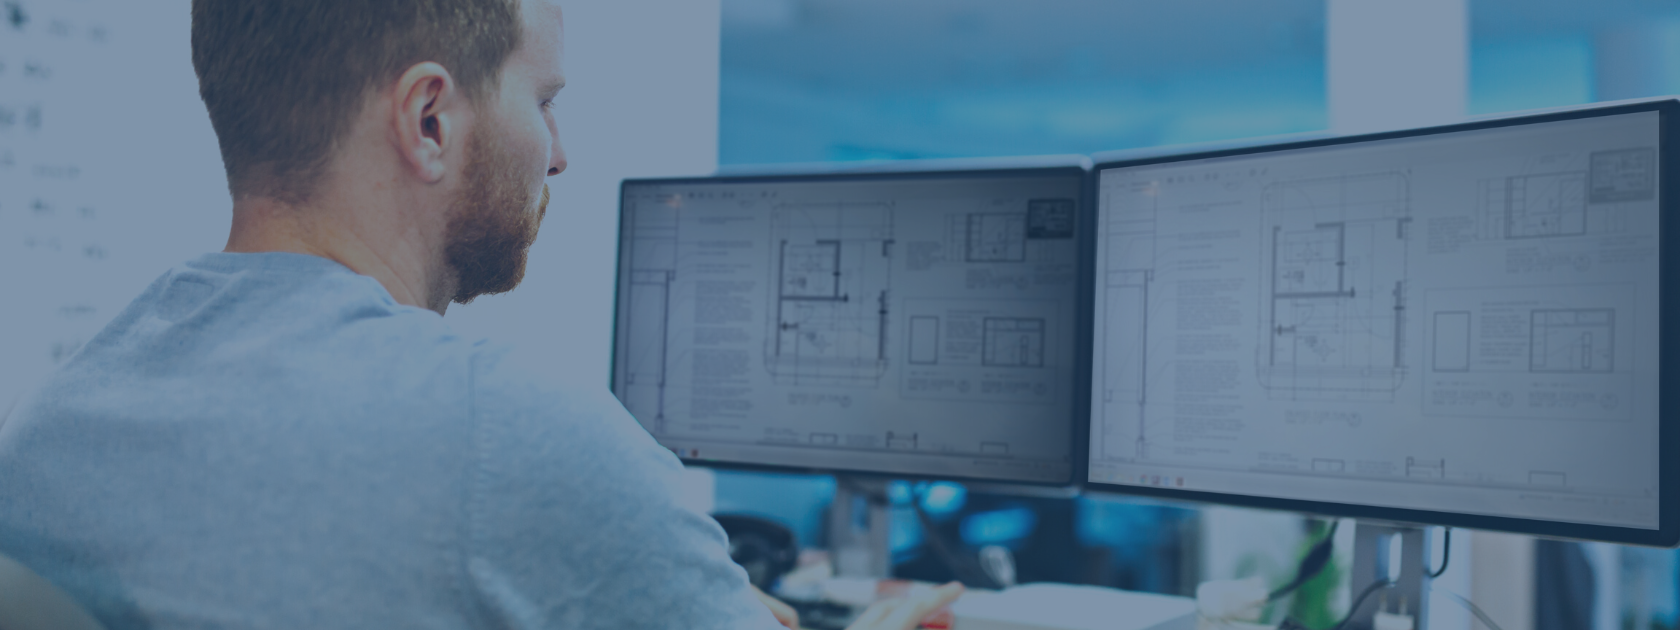 Employee reviewing building plans on desktop monitor